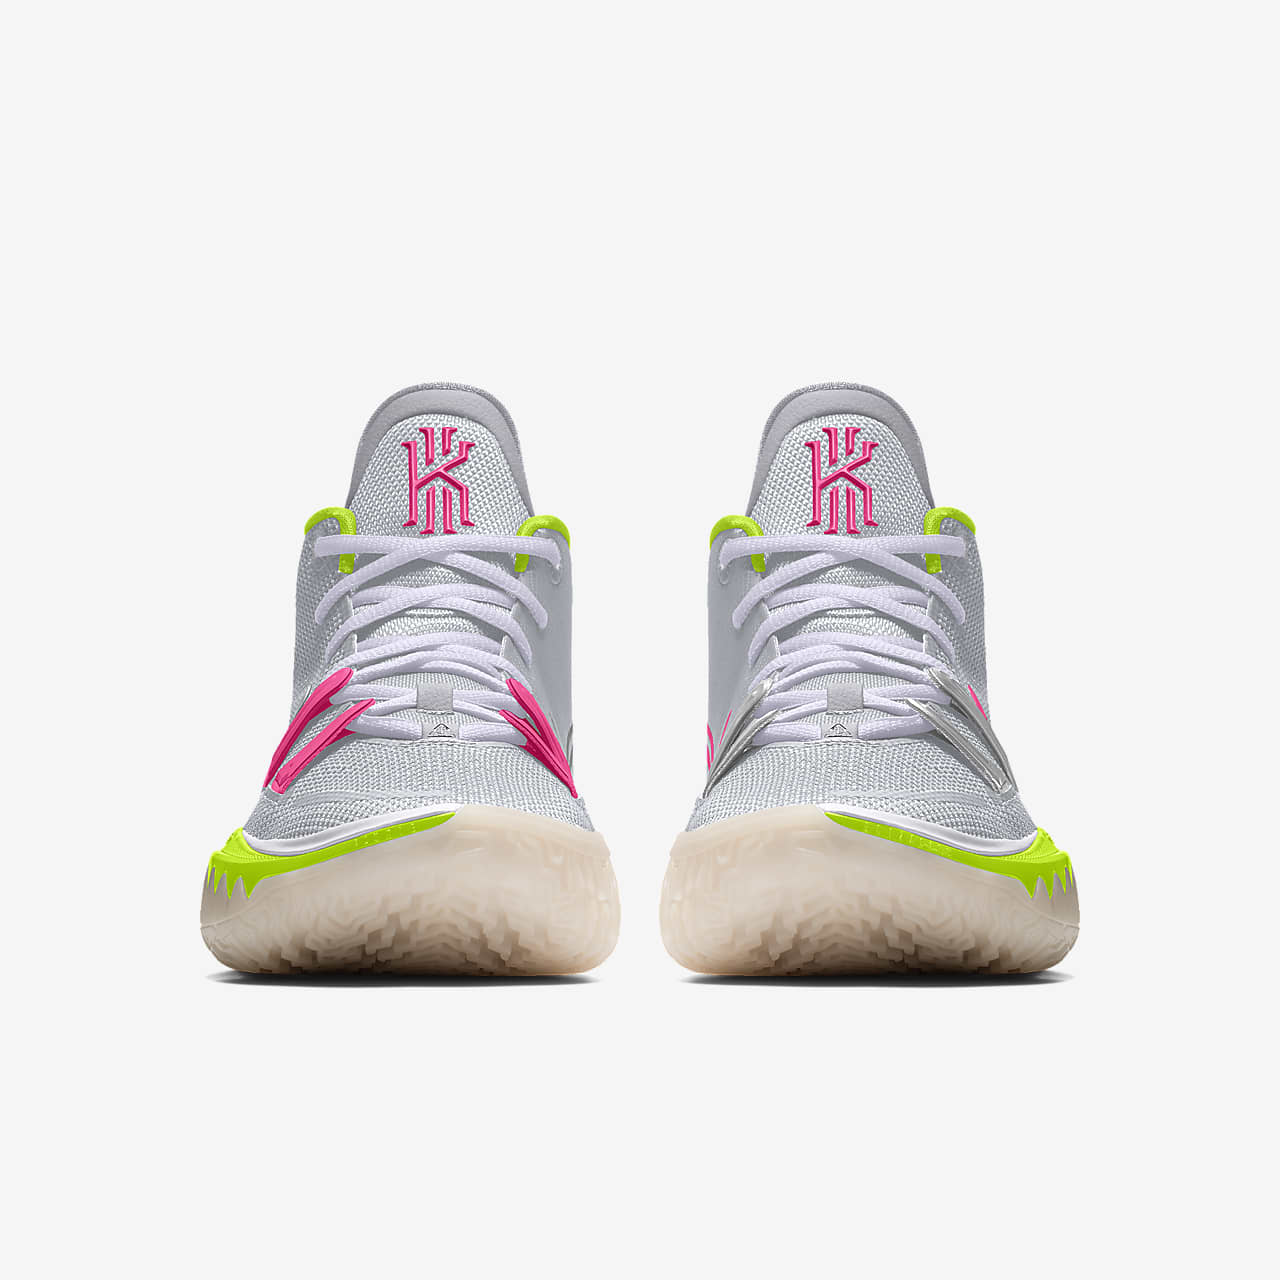 kyrie irving nike shoes customize